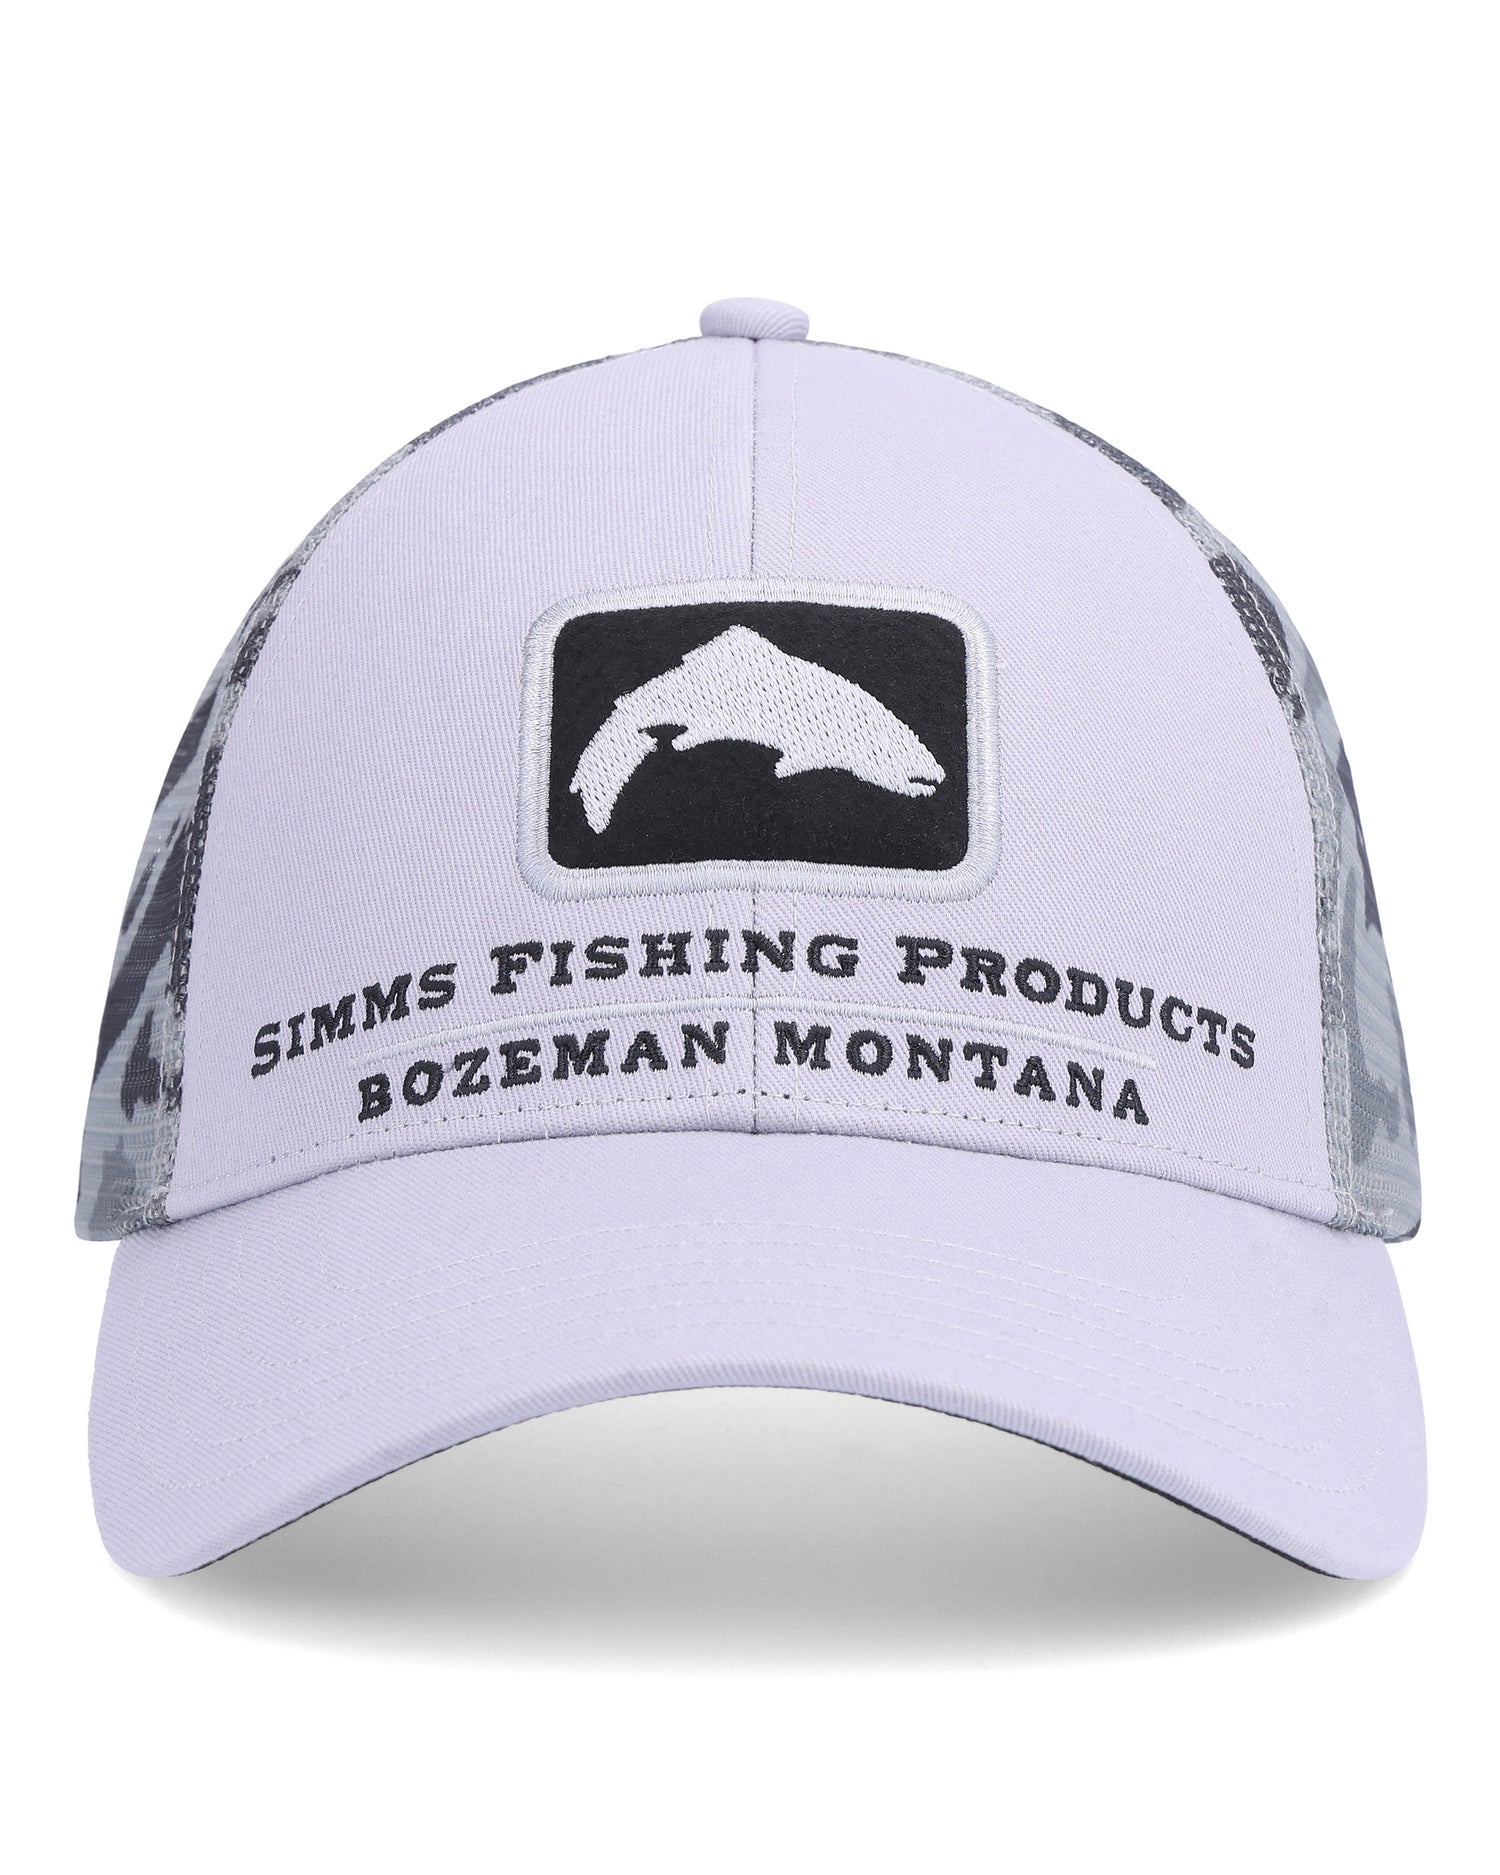 Trout Icon Trucker Hat | Simms Fishing Products